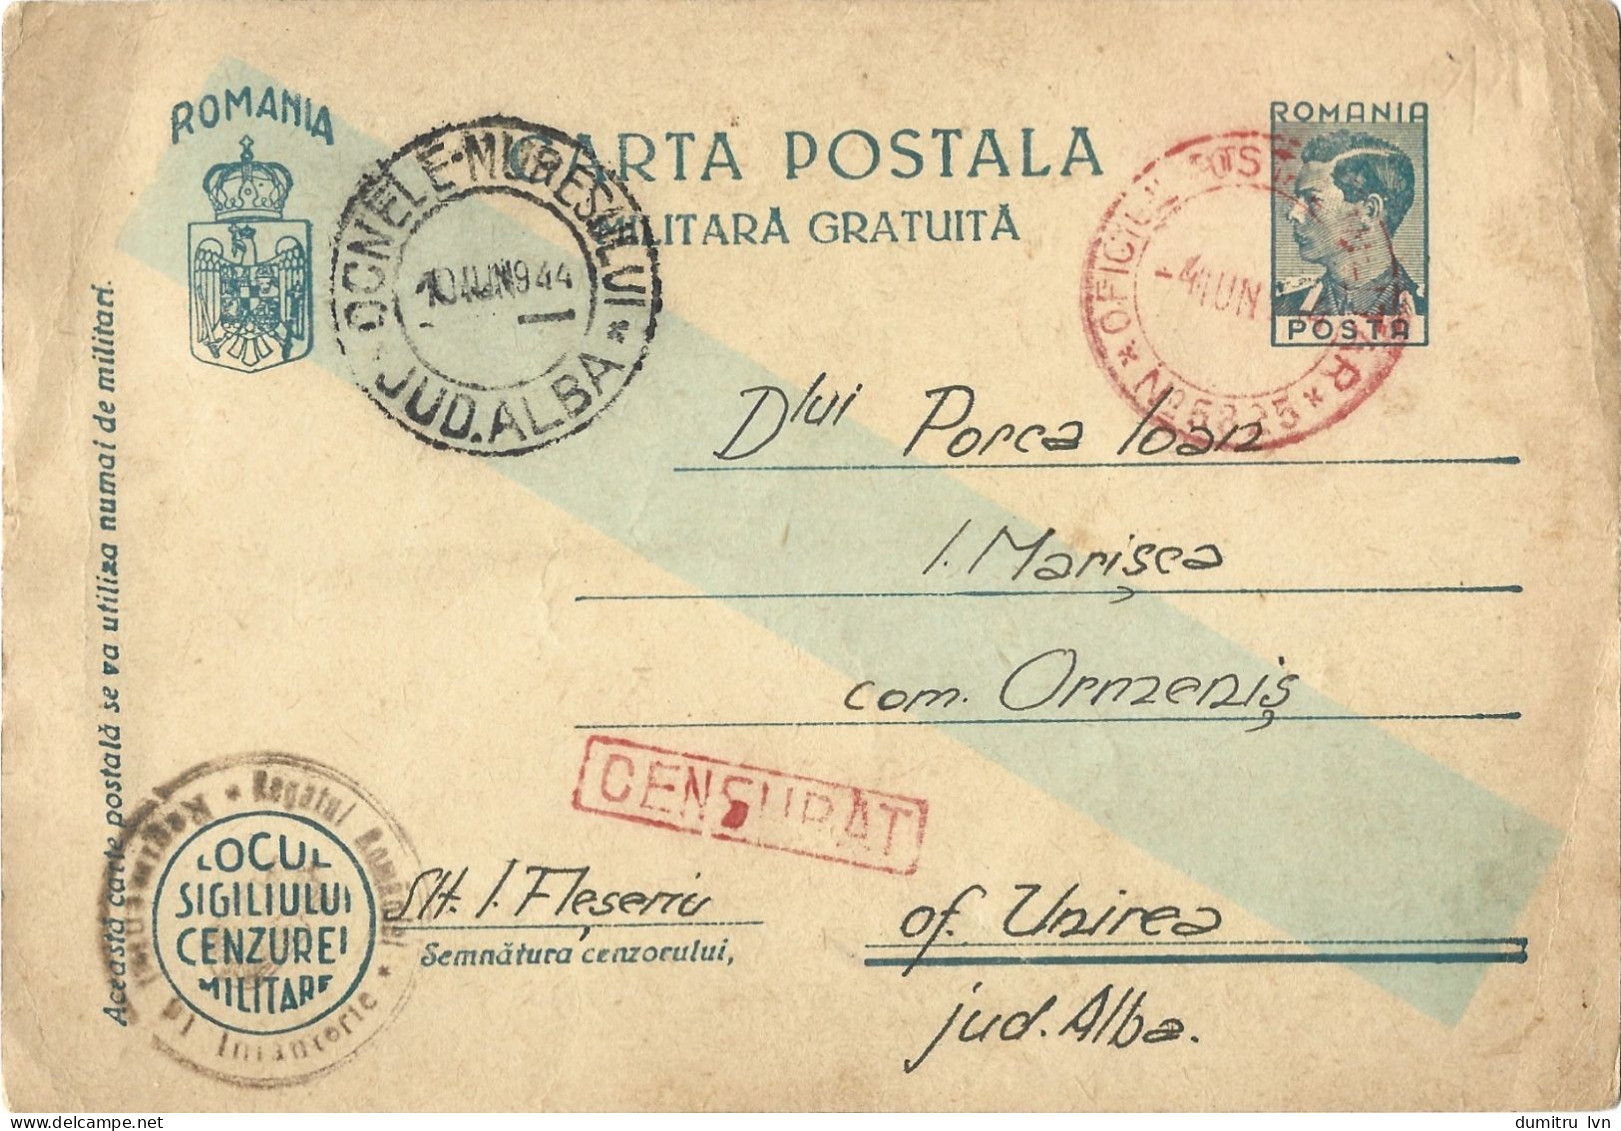 ROMANIA 1944 FREE MILITARY POSTCARD, MILITARY CENSORED, OPM 5825, POSTCARD STATIONERY - Lettres 2ème Guerre Mondiale